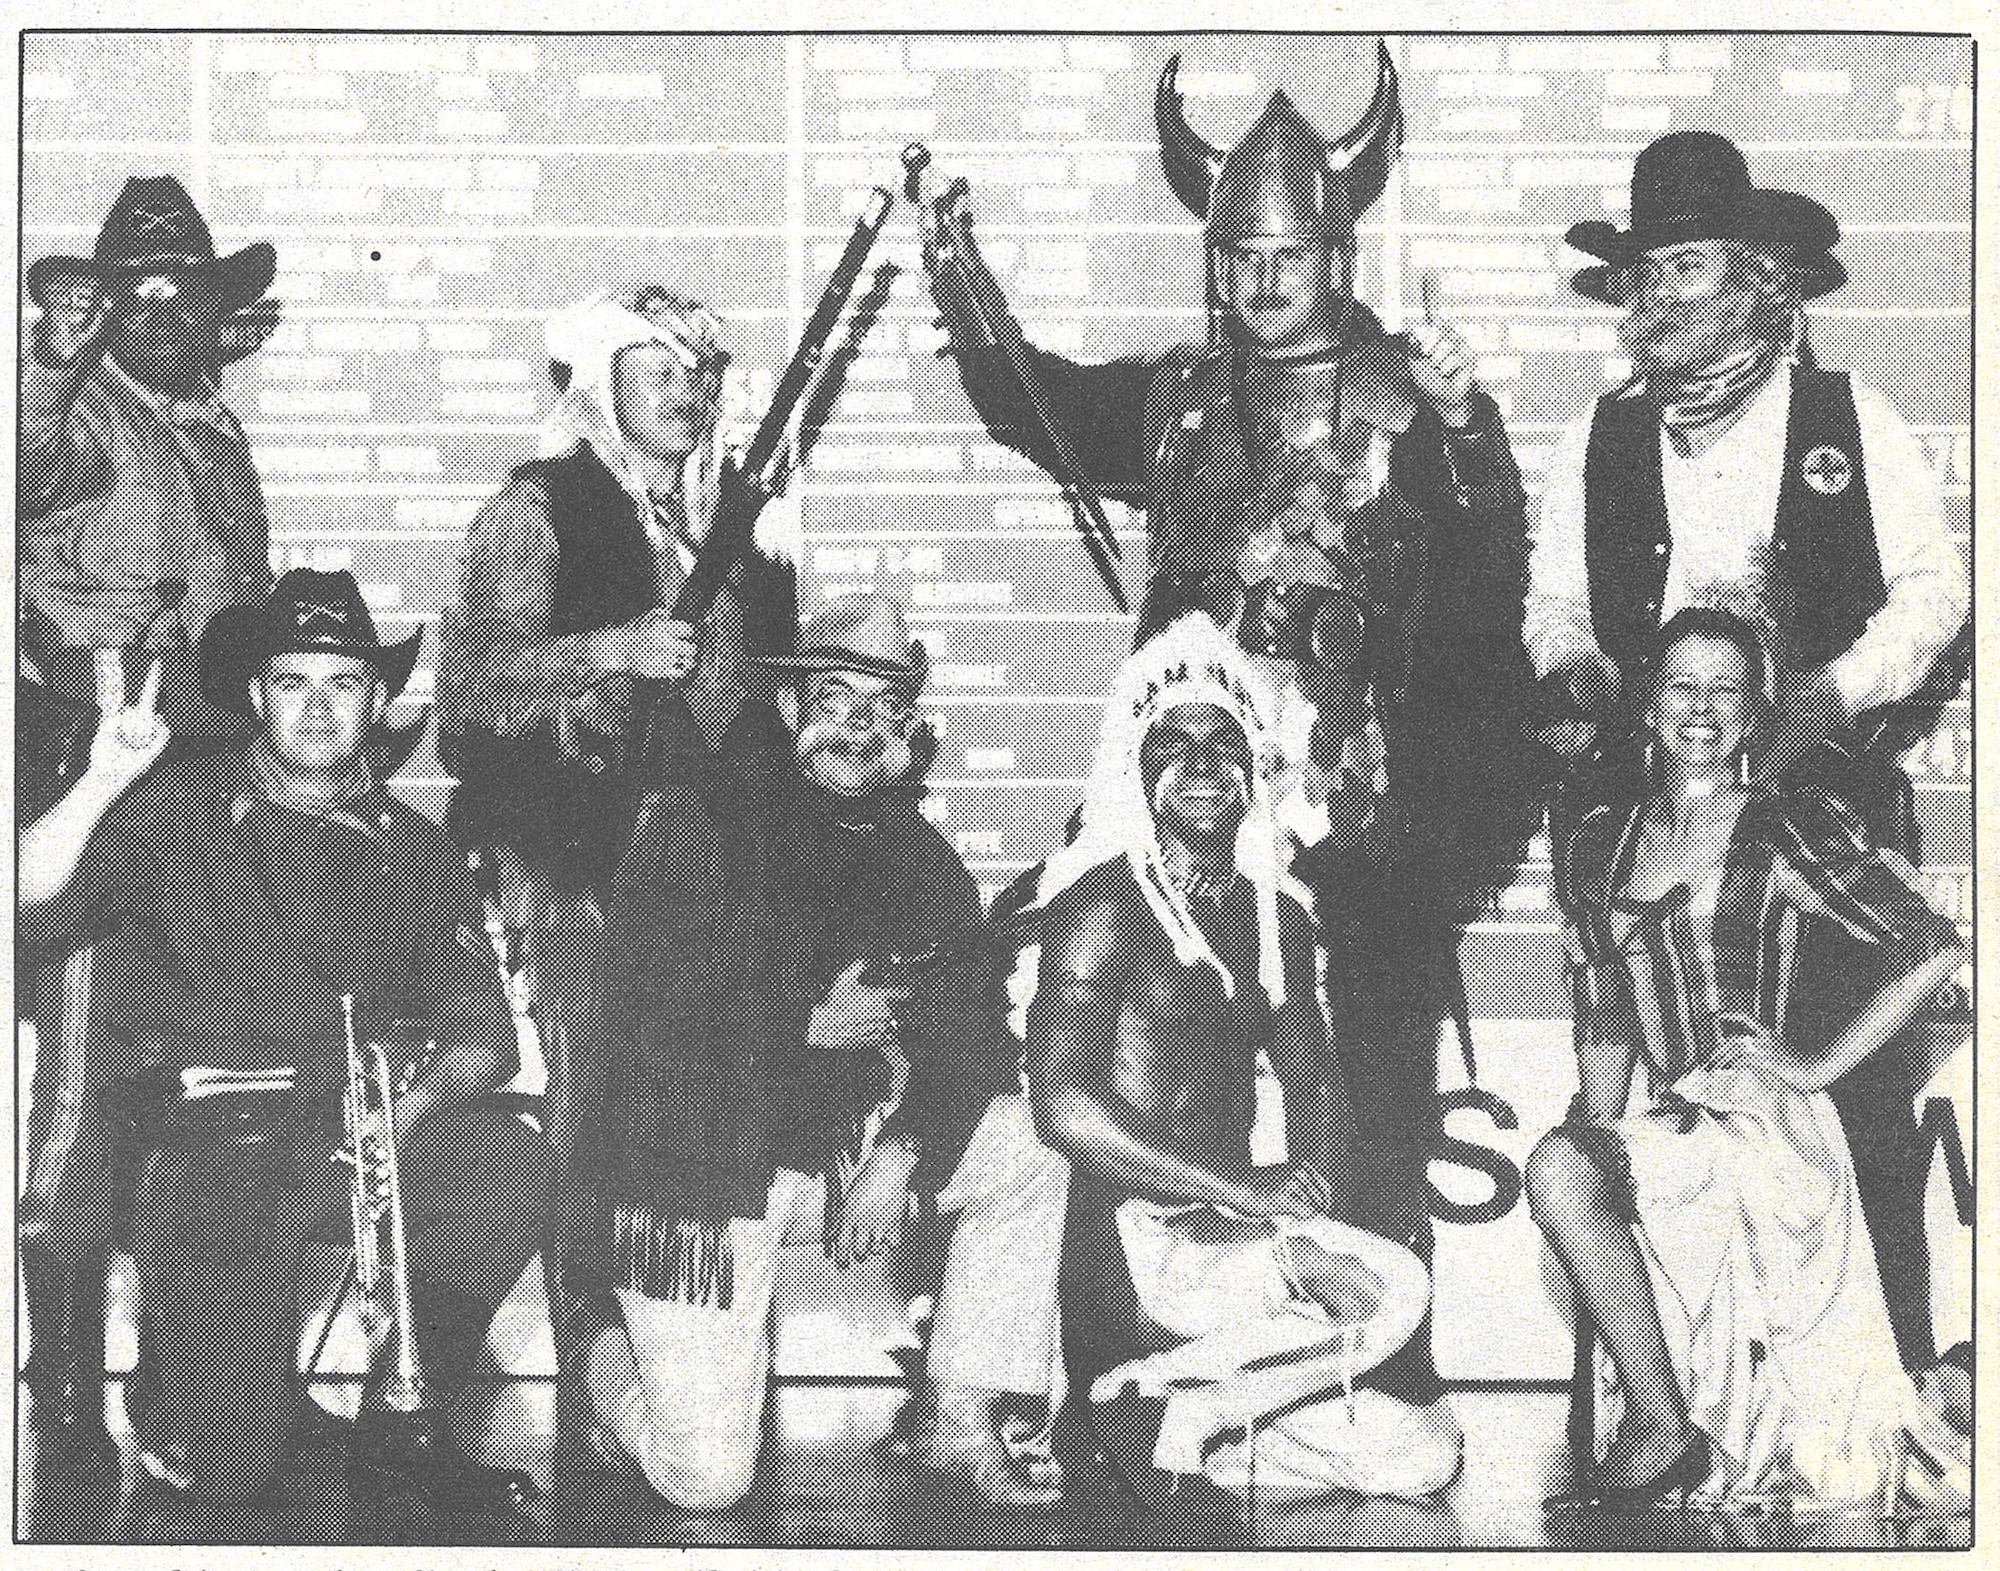 A 1989 group photo shows an early version of the 341st Missile Wing’s mountain man at Strategic Air Command’s Olympic Arena Missile Combat Competition, Vandenberg Air Force Base, Calif. The original caption reads: “Mascots from 1989 Olympic Arena competition include (left to right) Super Troopers, 90th Strategic Missile Wing, F.E. Warren, Wyo.; High Plains Warriors, 341st SMW, Malmstrom AFB, Mont.; Roughriders, 91st SMW, Minot AFB, N.D.; War Chiefs, 351st SMW, Whiteman AFB, Mo.; Warriors of the North, 321st SMW, Grand Forks AFB, N.D. and the Black Hills Bandits, 44th SMW, Ellsworth AFB, S.D.” (Photo courtesy of the Malmstrom Air Force Base Museum)